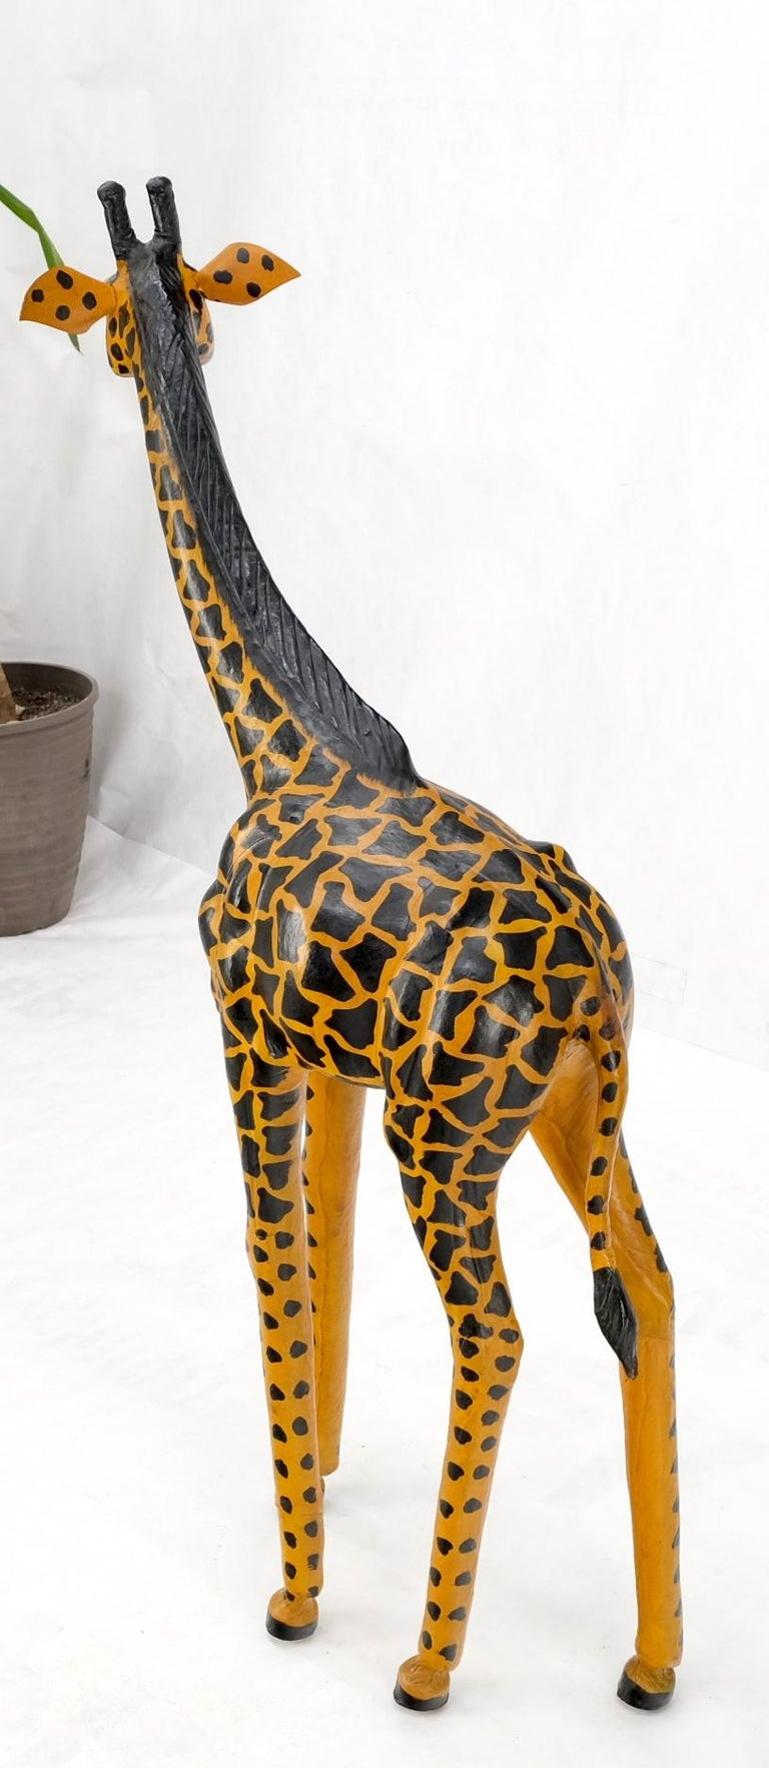 Large Tooled Leather Sculpture of a Giraffe